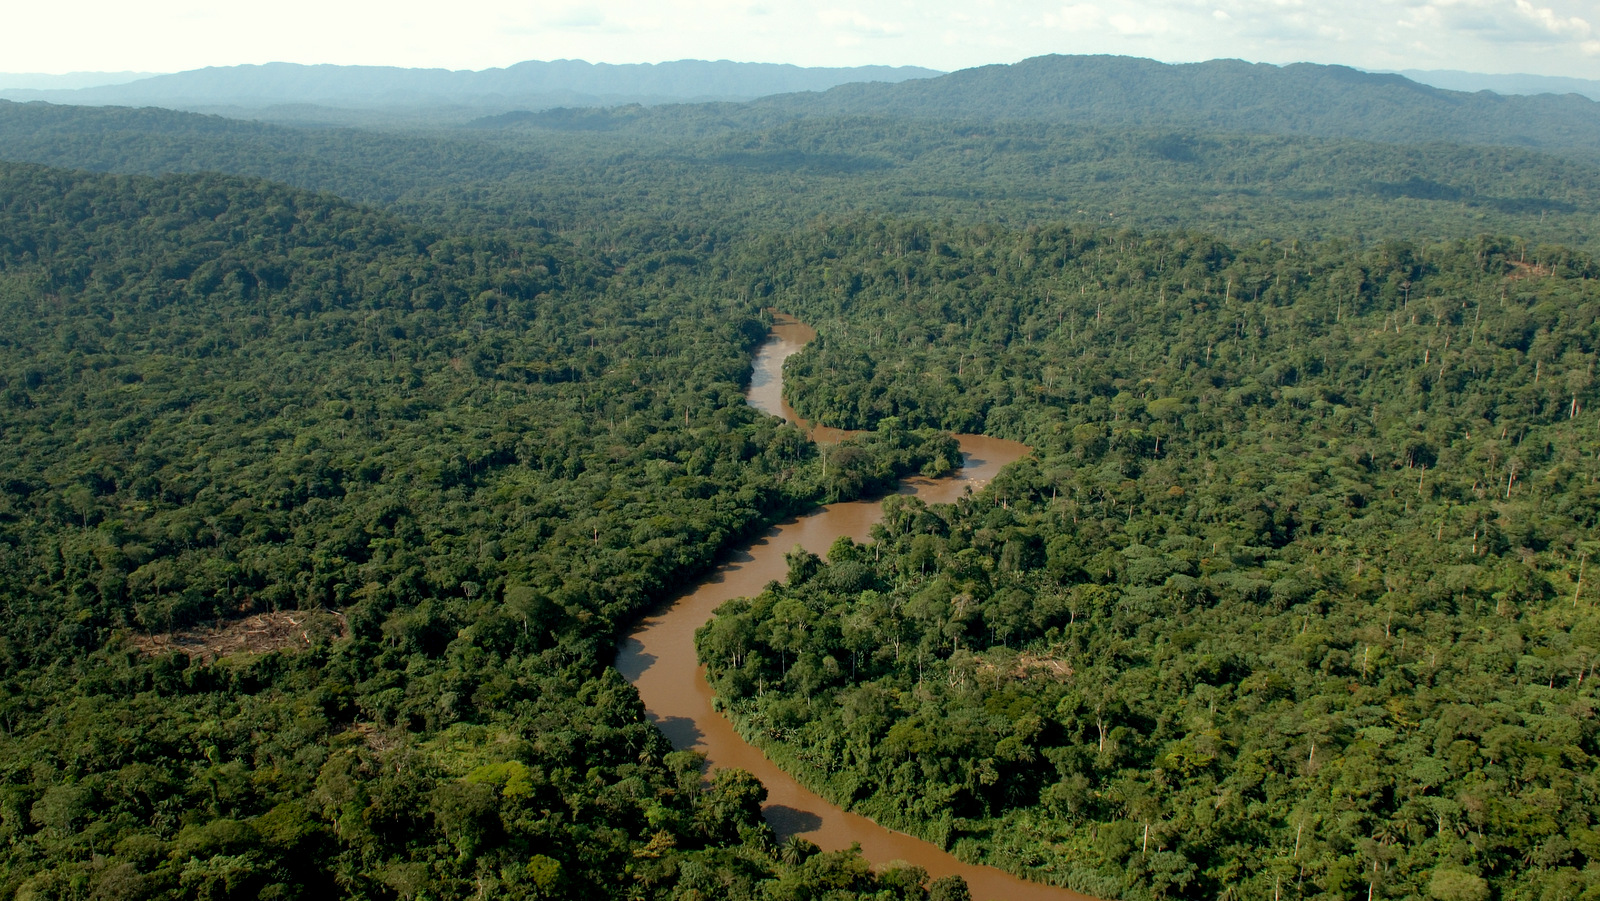 The Walikale territory is low lying un-populated jungle in the Cogo rain forest basin. (Photo: Julien Harneis/flickr)